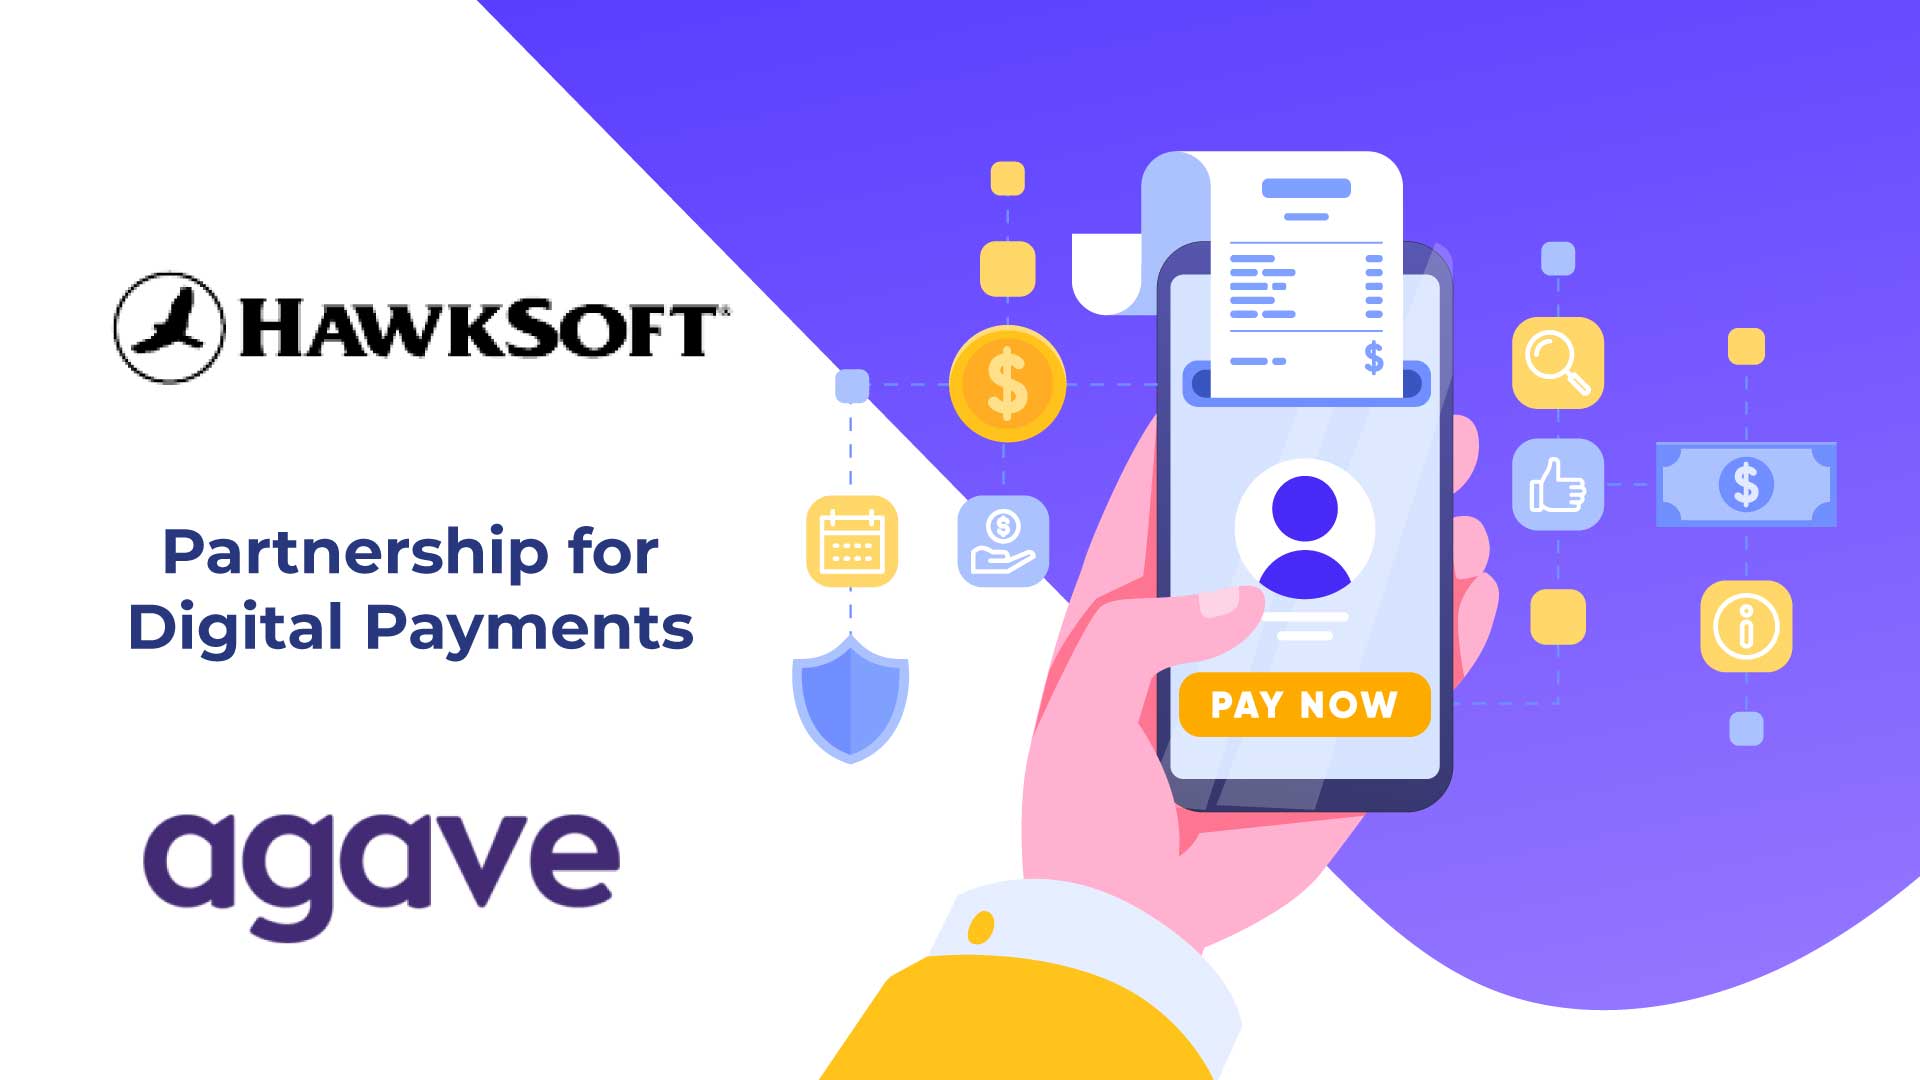 HawkSoft and Agave Form Partnership for Digital Payments